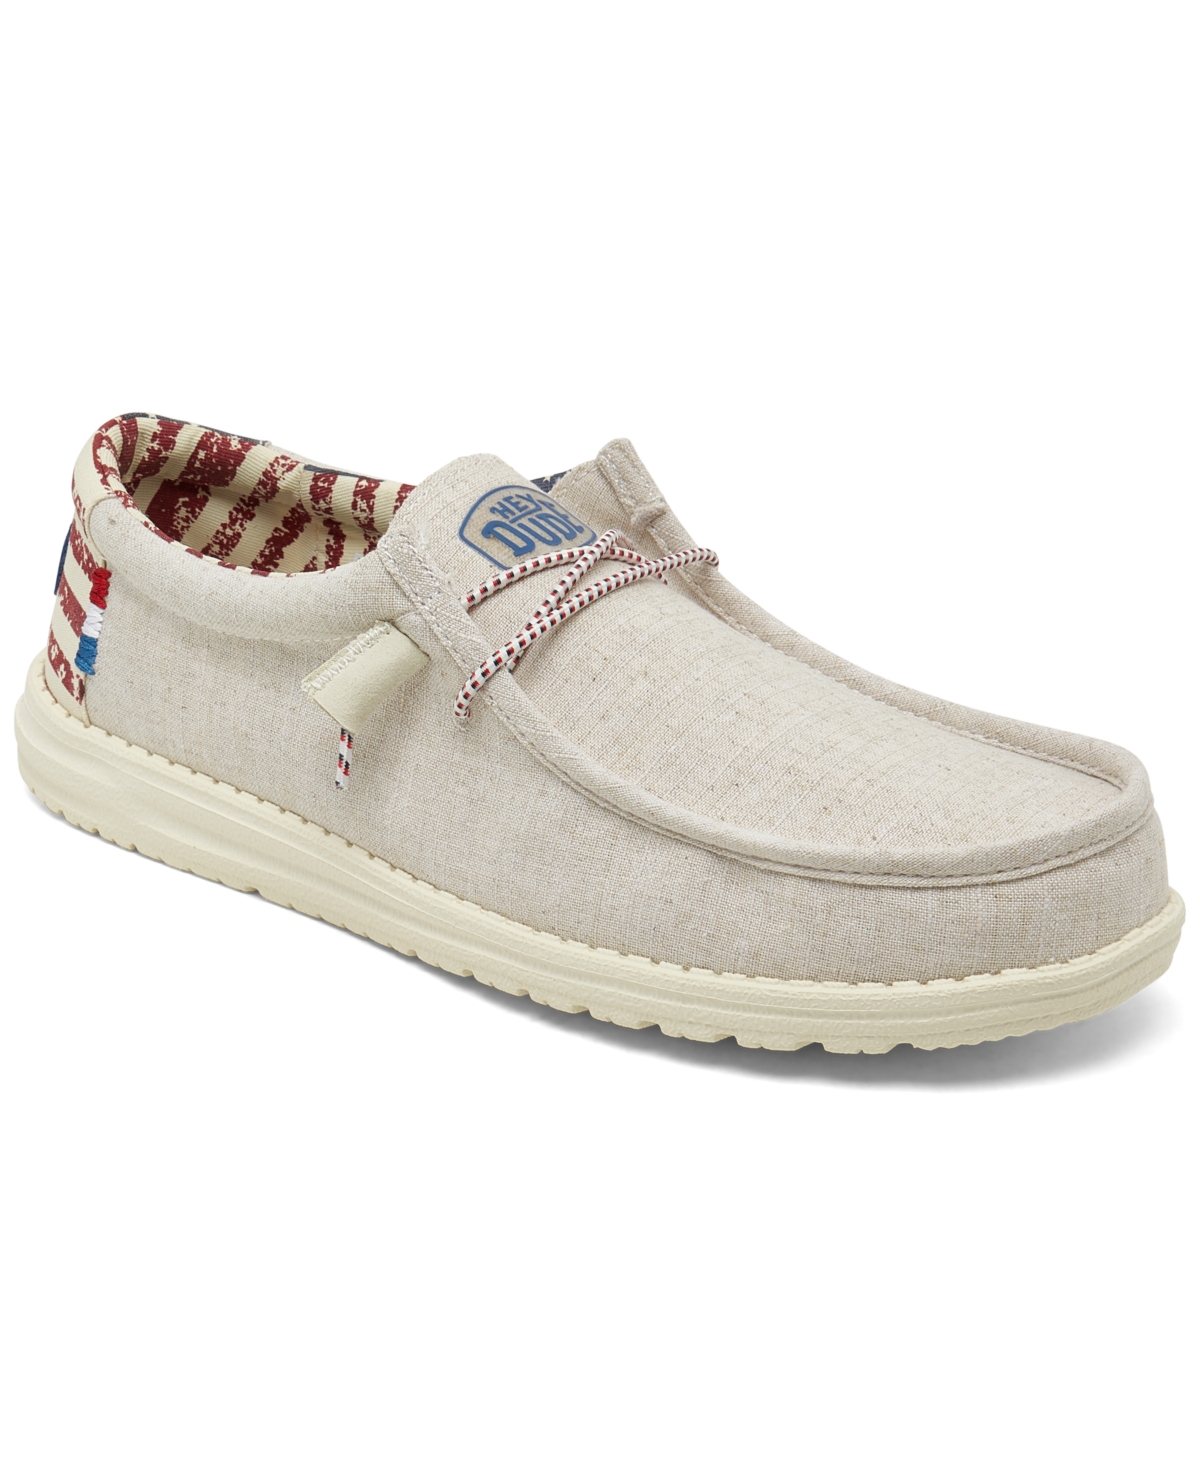 HEY DUDE MEN'S WALLY PATRIOTIC CASUAL MOCCASIN SNEAKERS FROM FINISH LINE